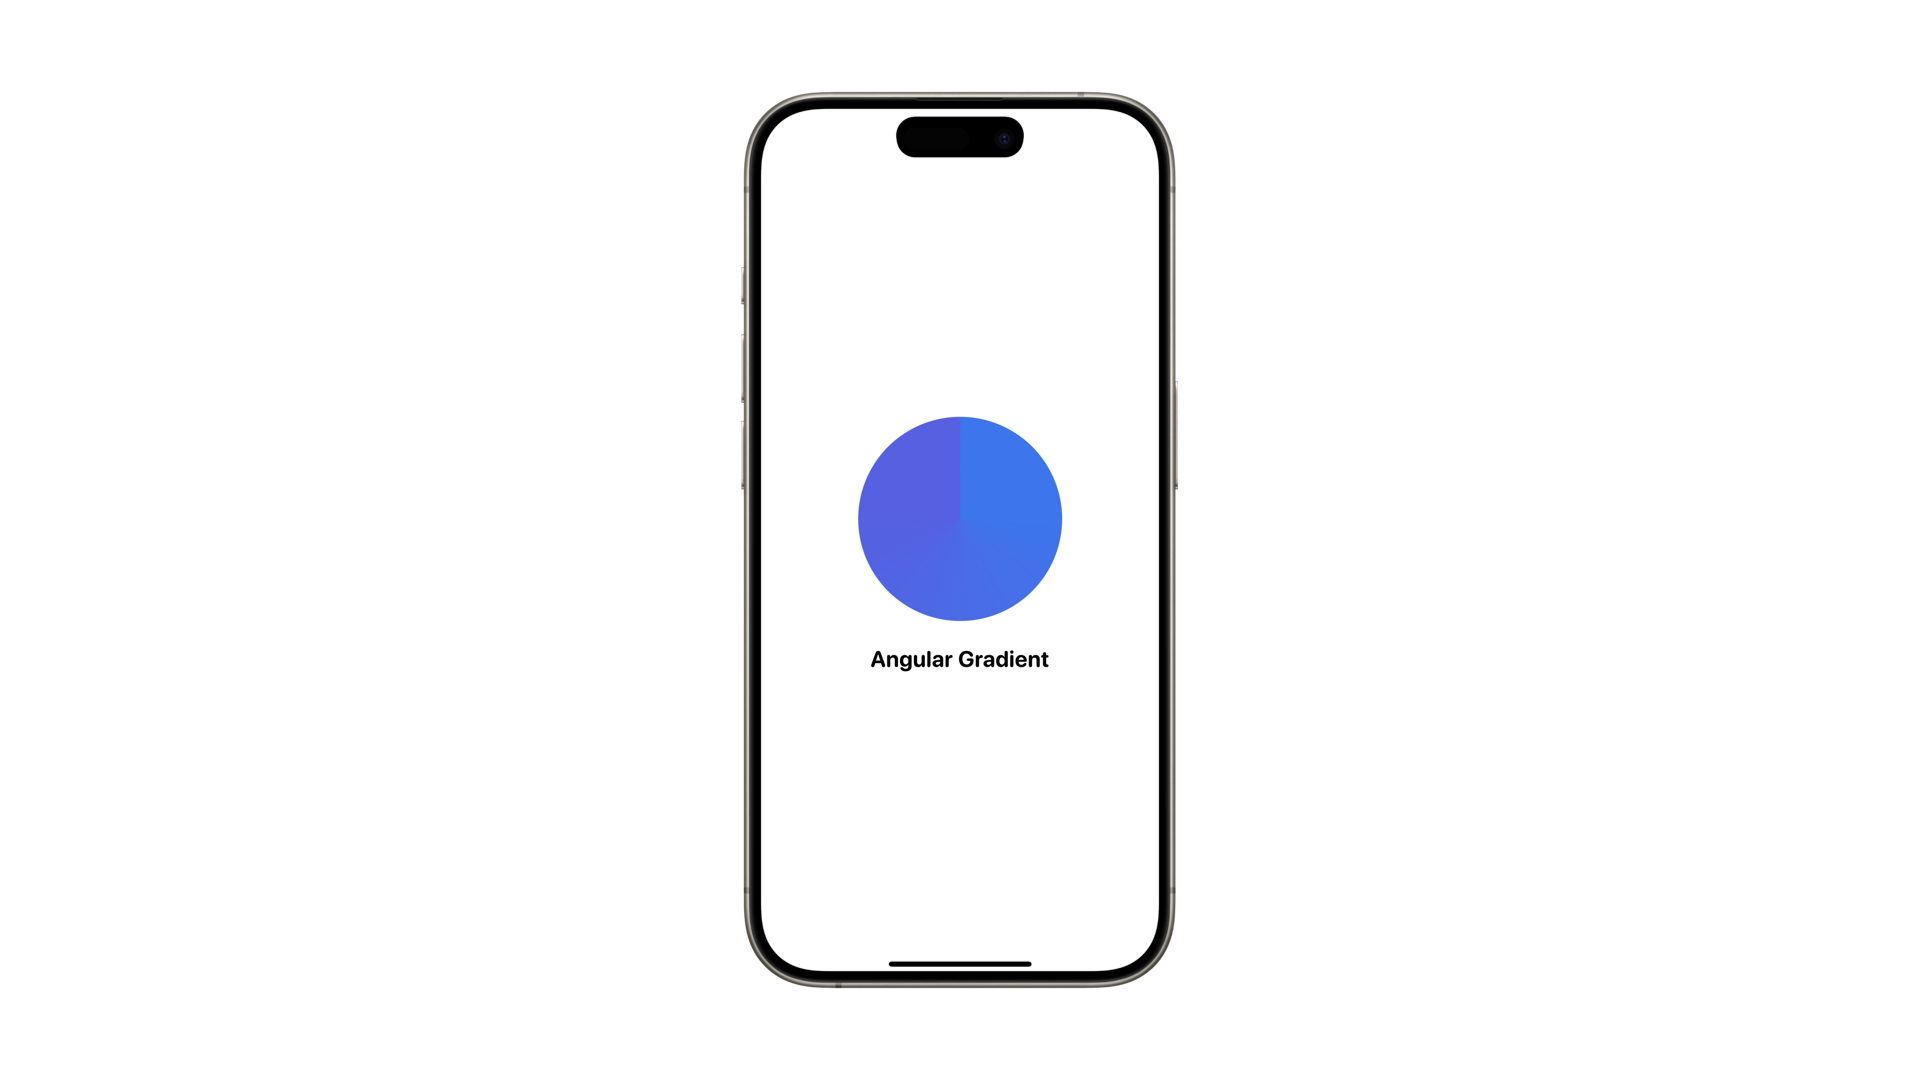 Frame of an iPhone with a circular shape in the middle filled with a centralized angular gradient starting at the top